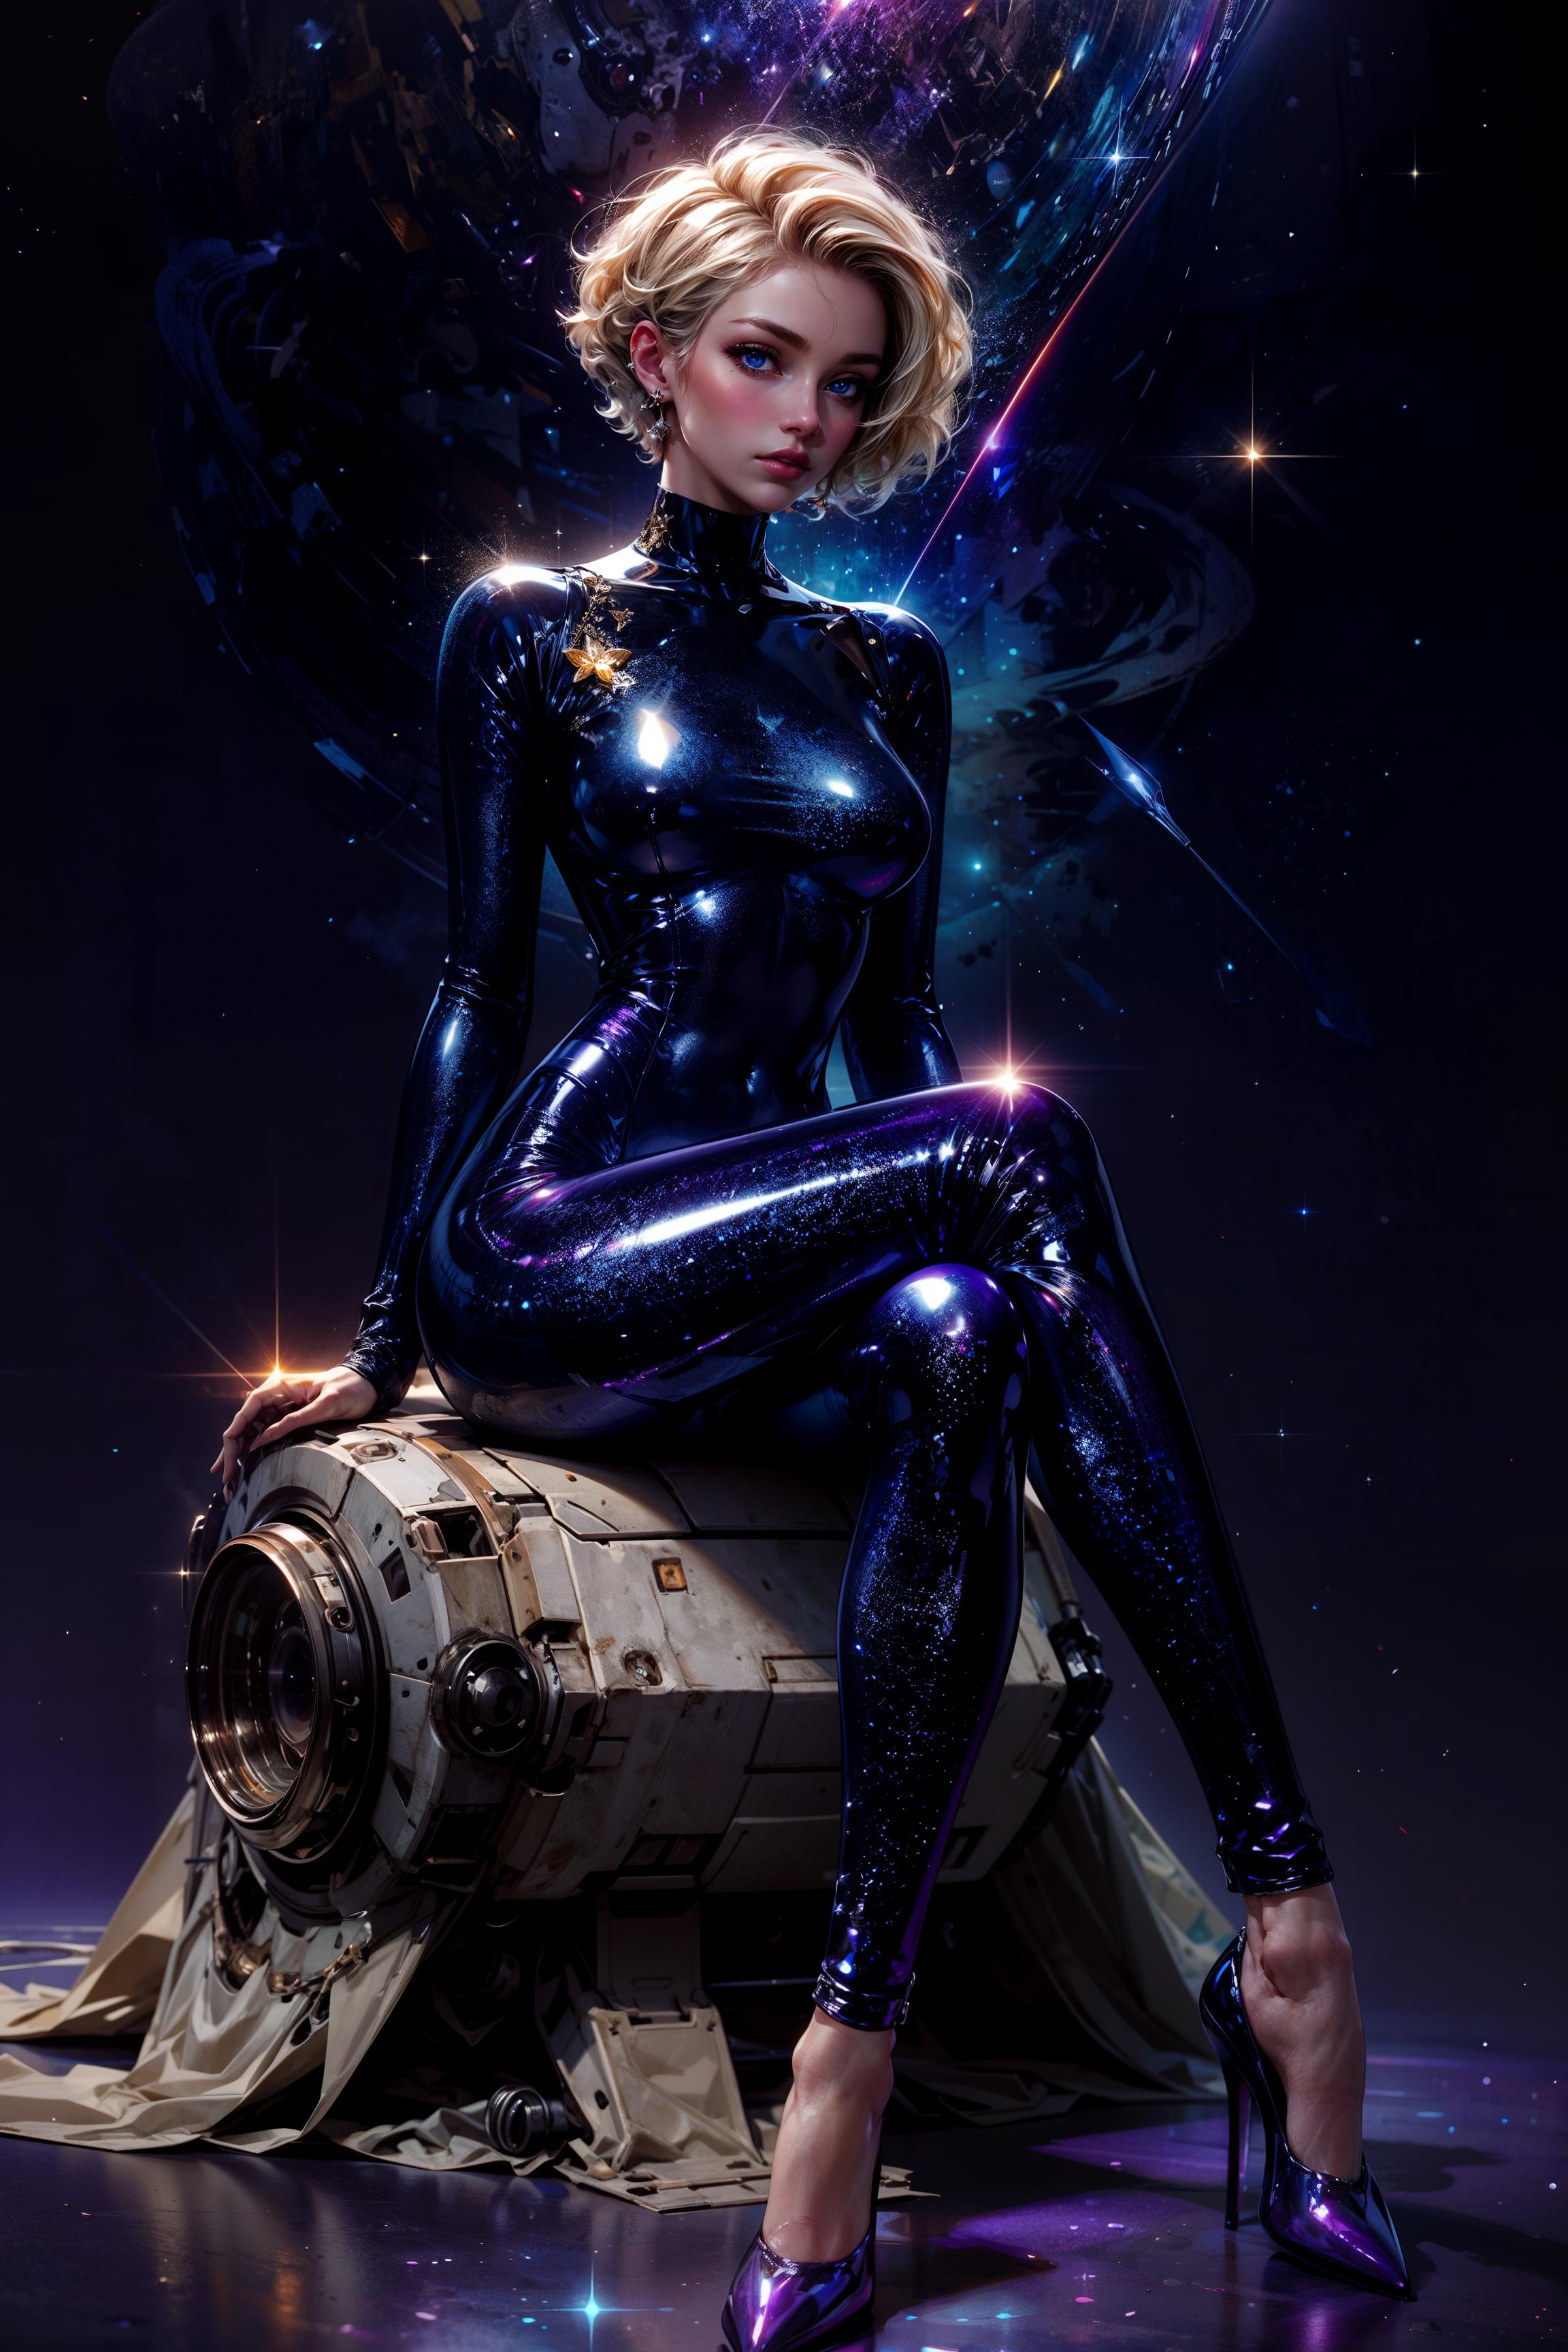 A woman in a purple body suit is sitting on a white object in a space setting.